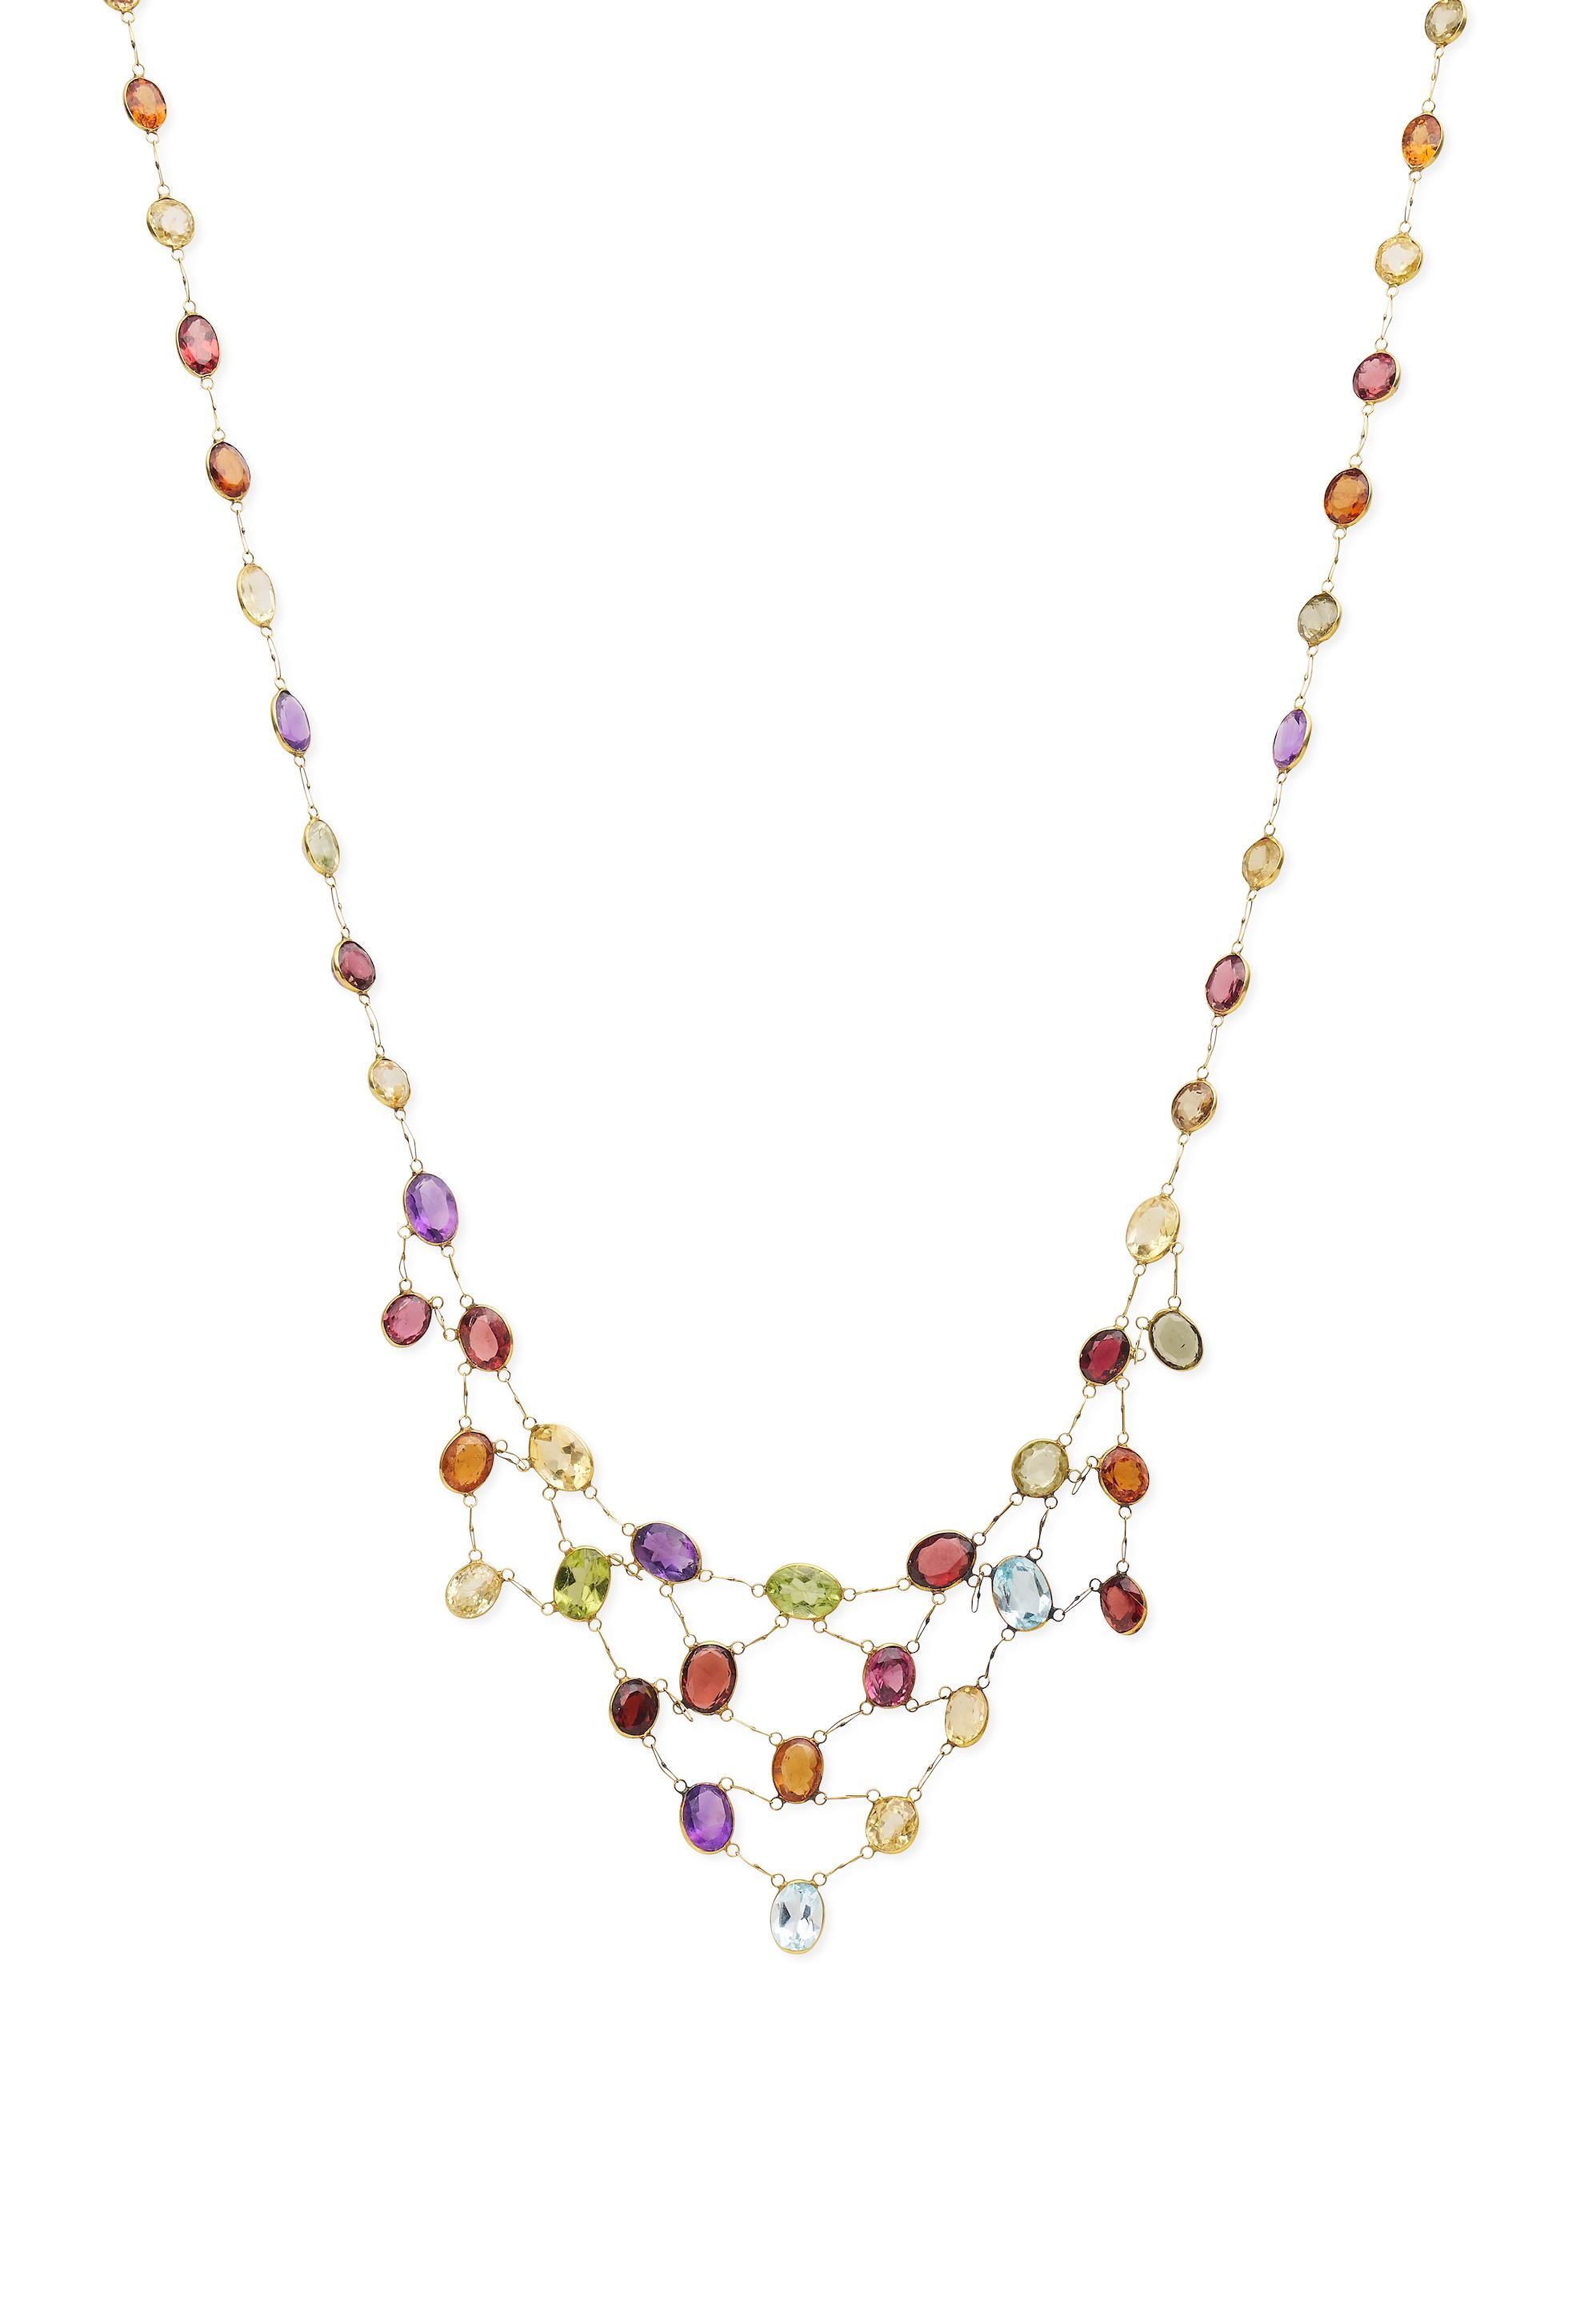 Gem-set bib necklace, Spectacle-set with amethyst, peridot,… - Necklace ...